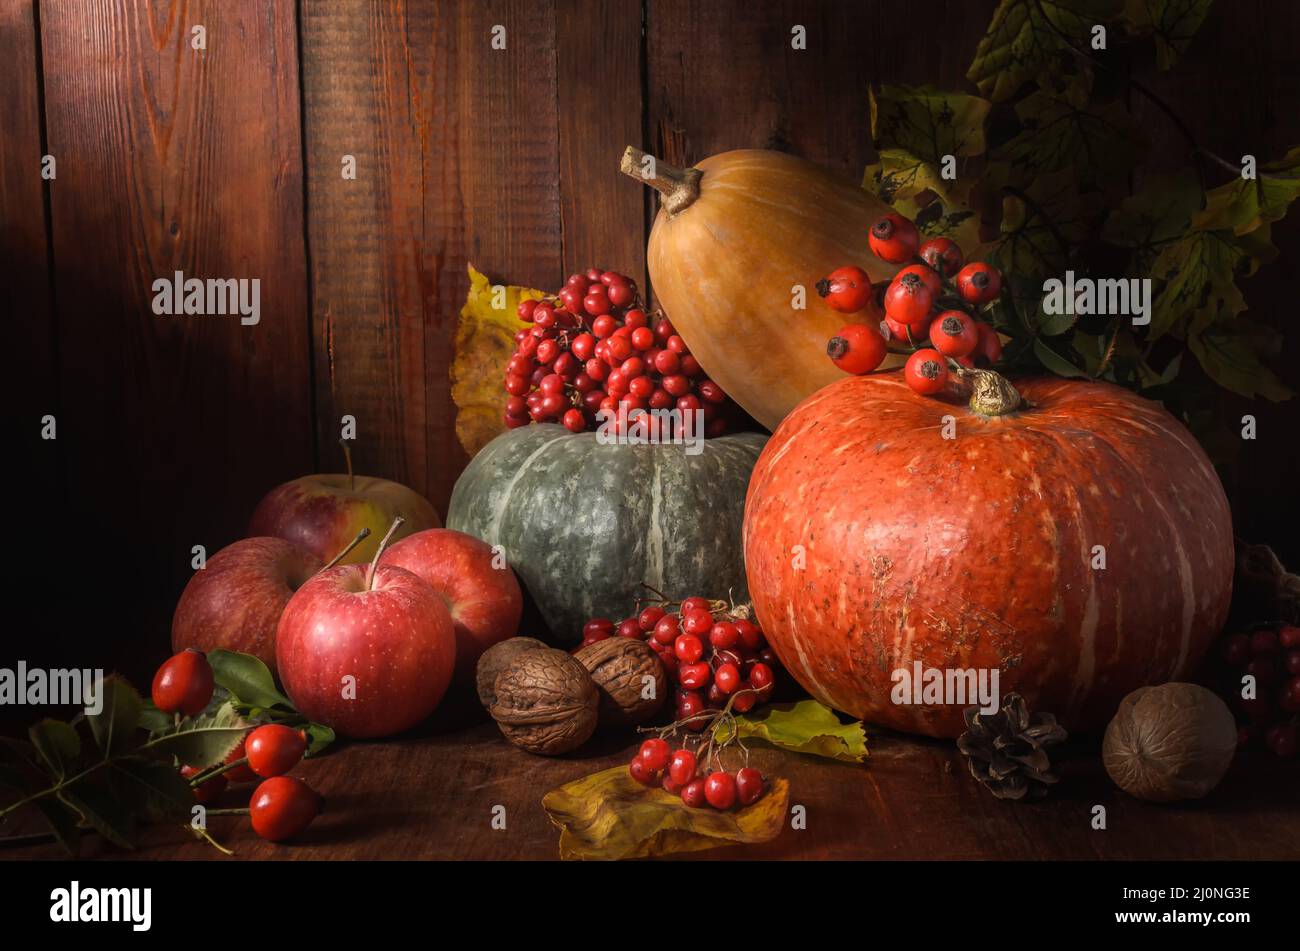 Apples and pumpkin on a dark wooden background in a rustic style Stock Photo